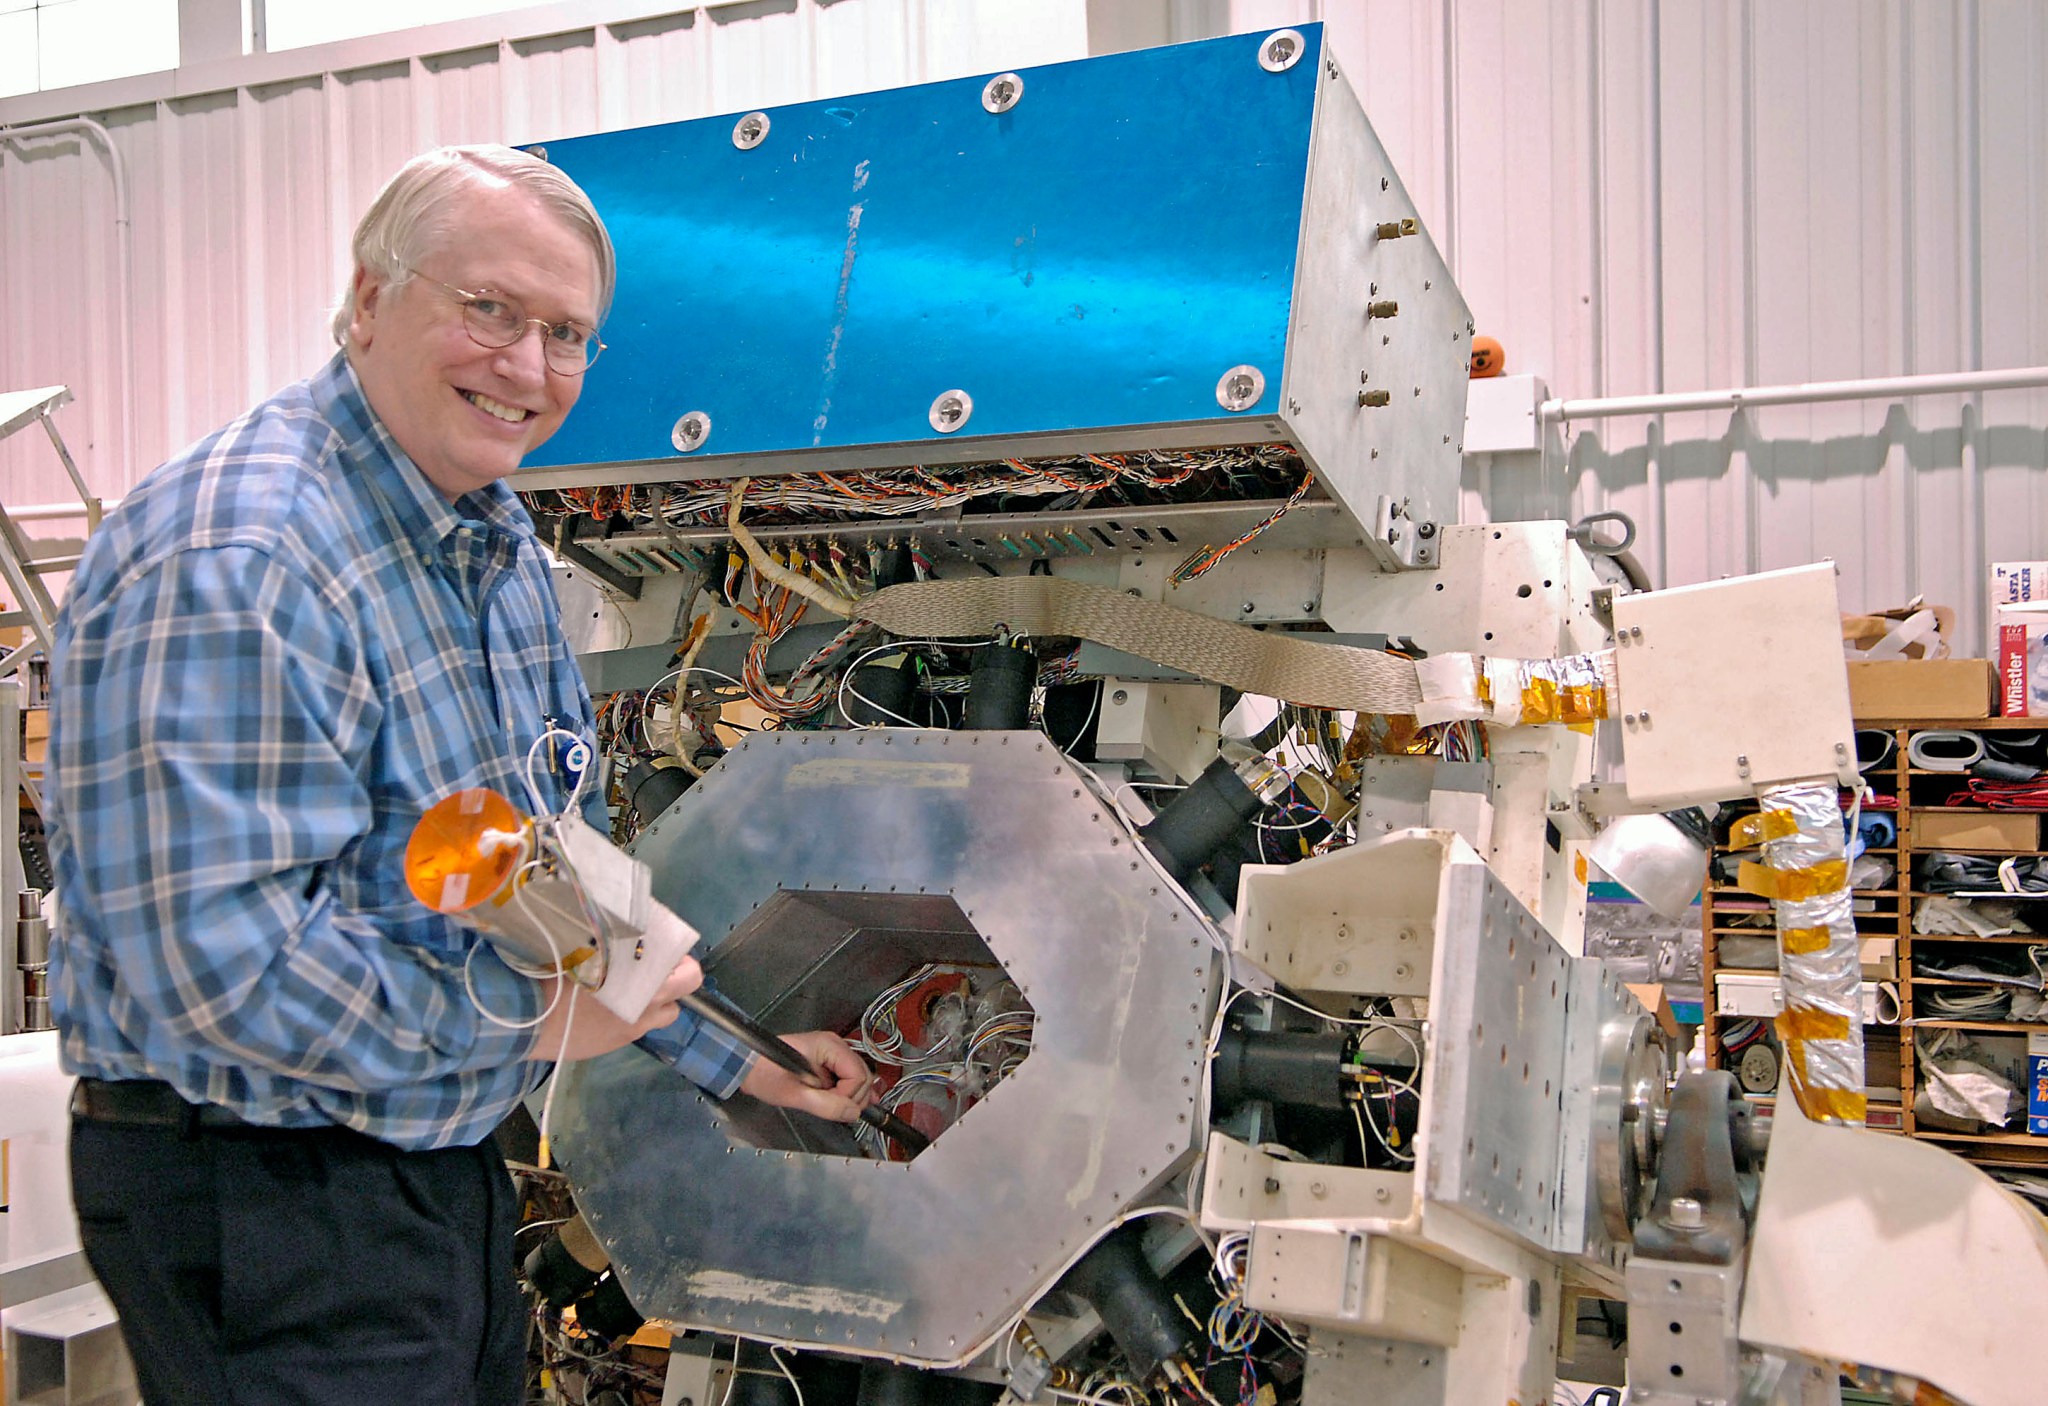 A man in a plaid shirt at left holds a cylindrical component near a large piece of steel-gray hardware. At top, one element is colored bright blue.